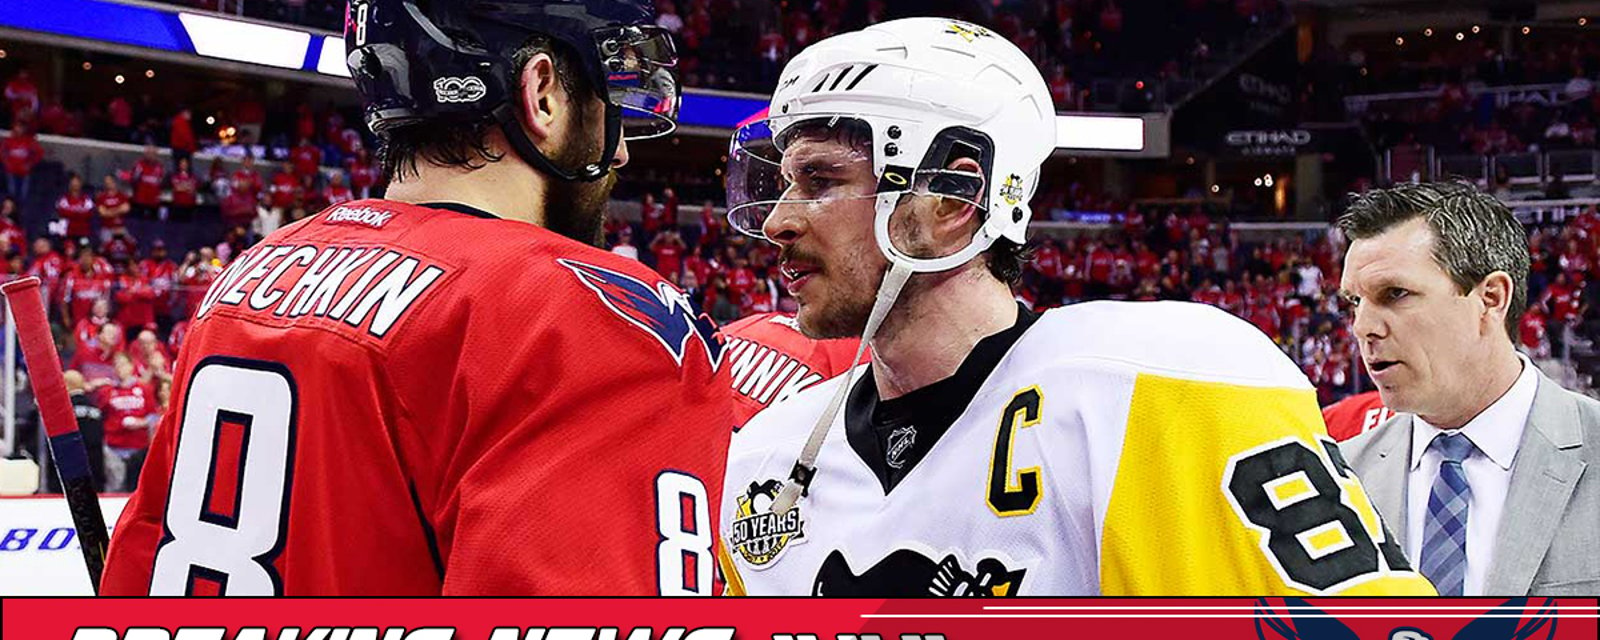 Report: Caps GM finally speaks out on Ovechkin’s future in DC